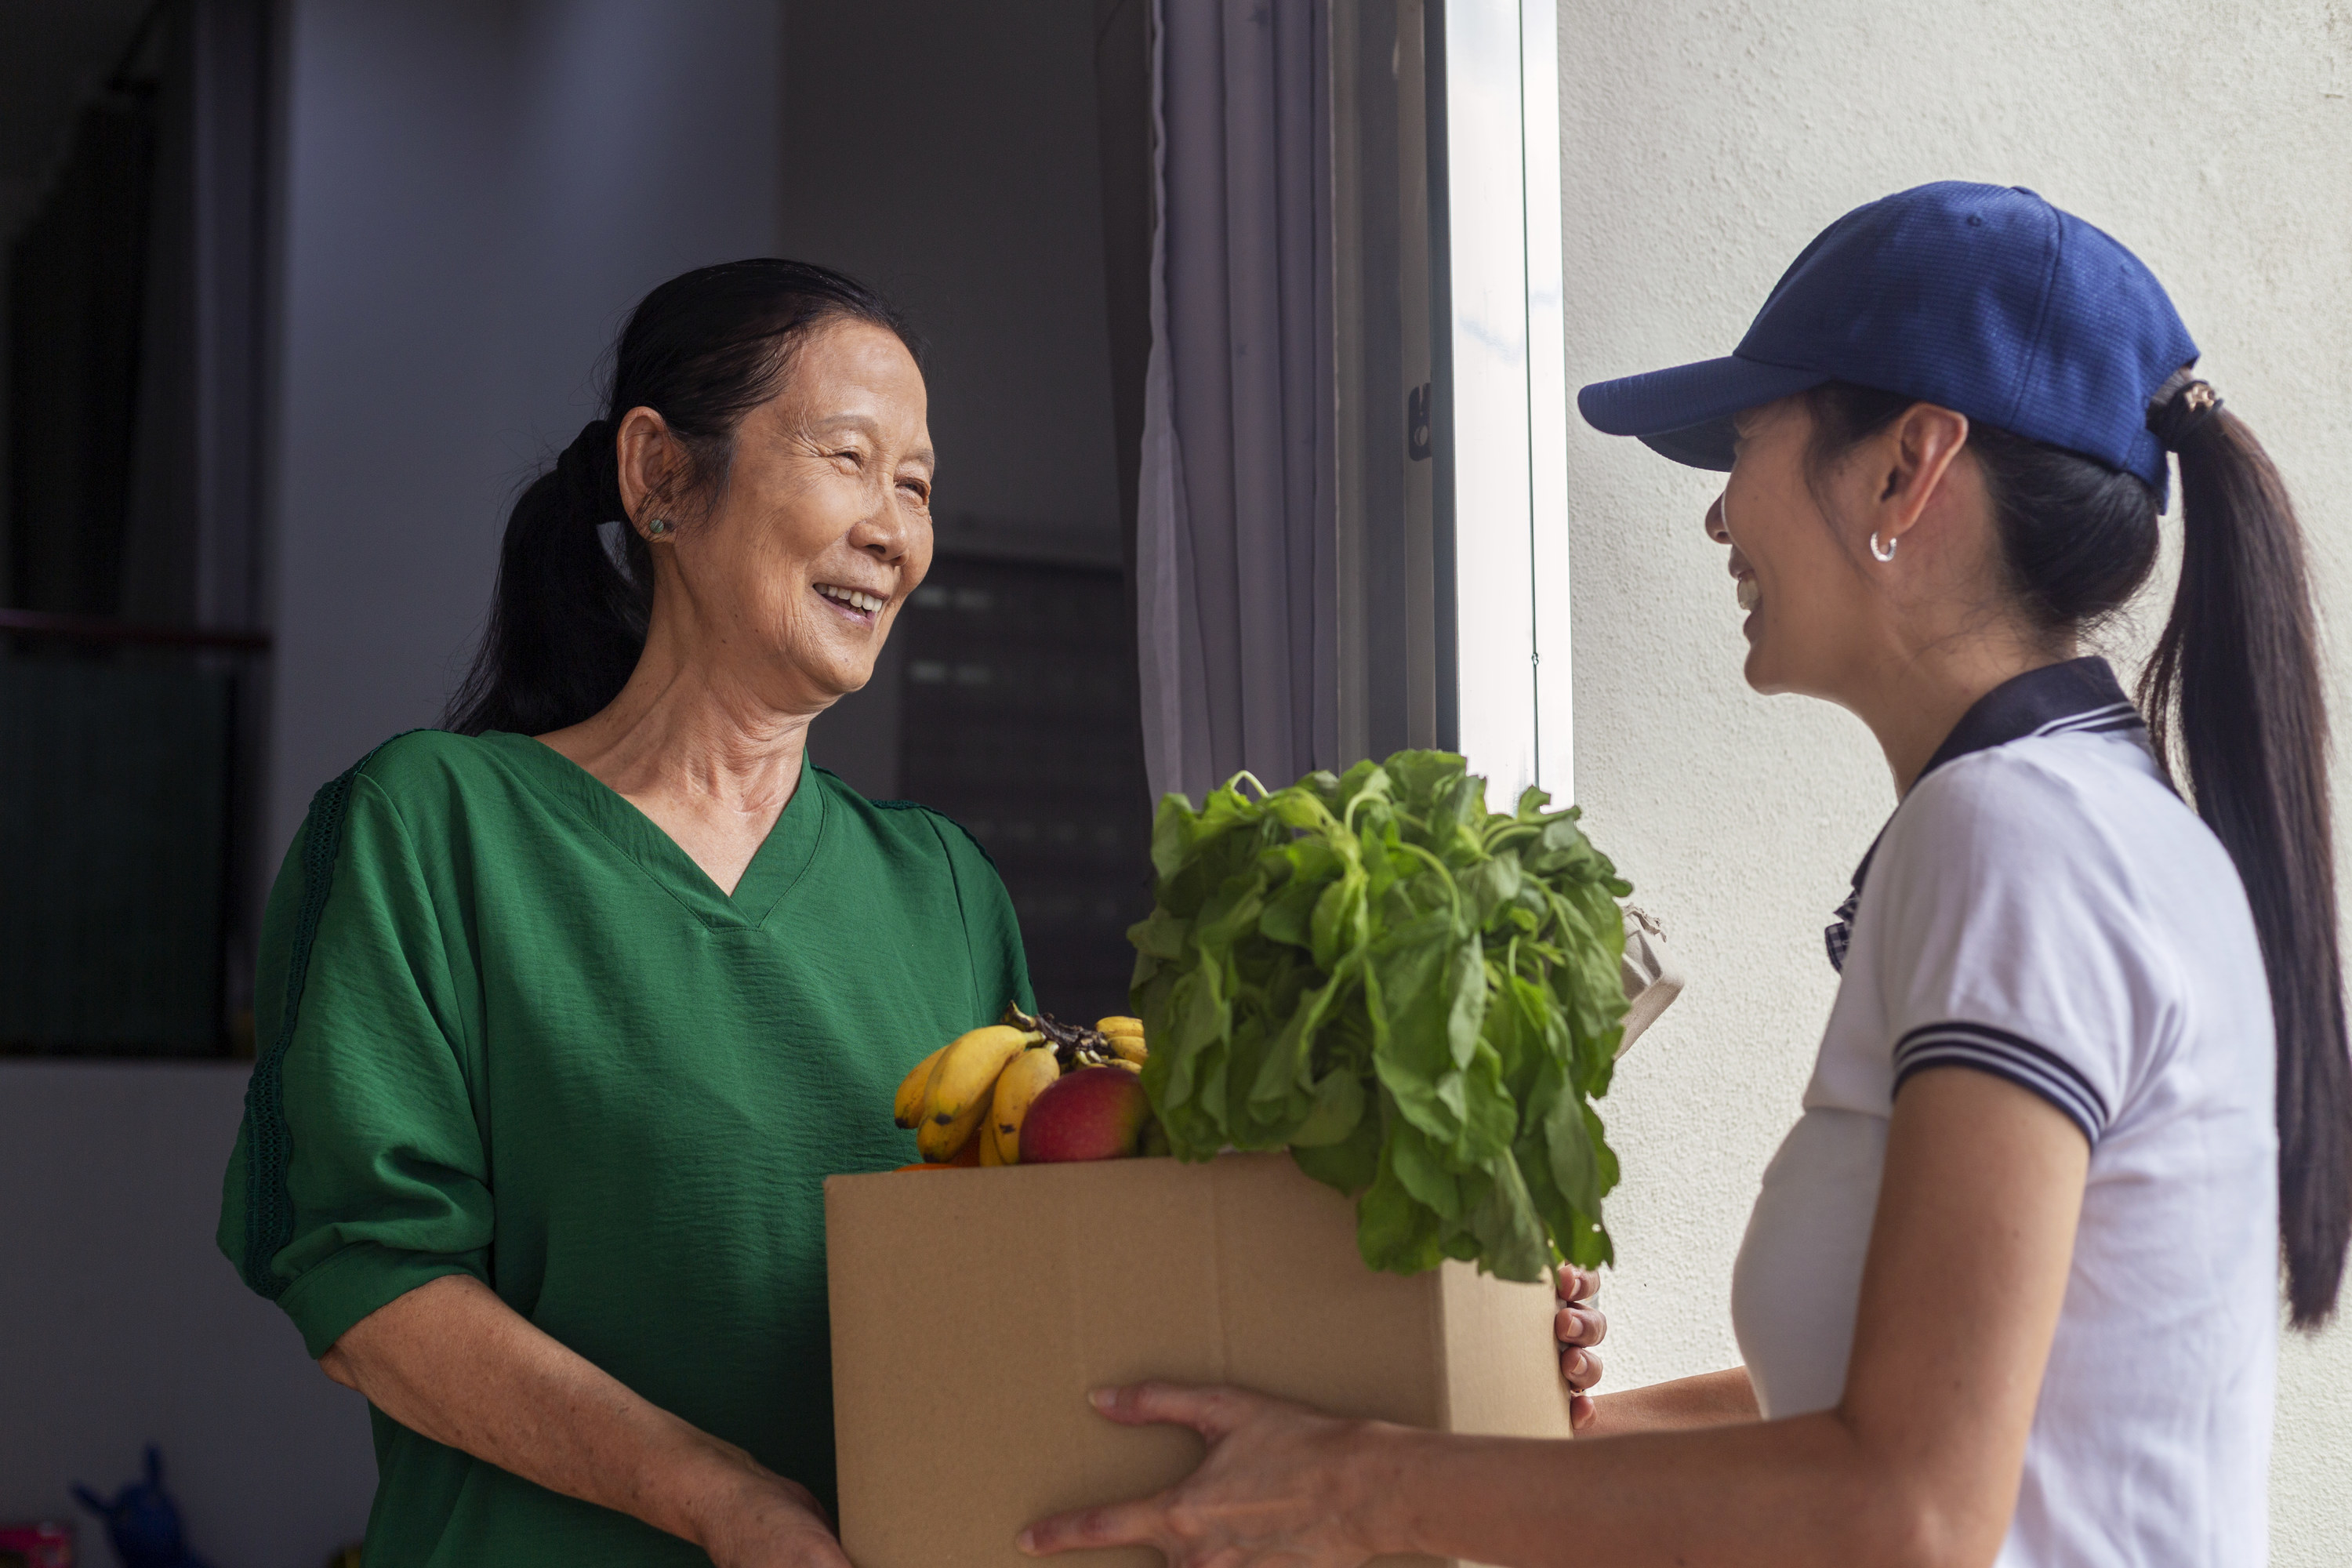 a woman handing a box of groceries to a person